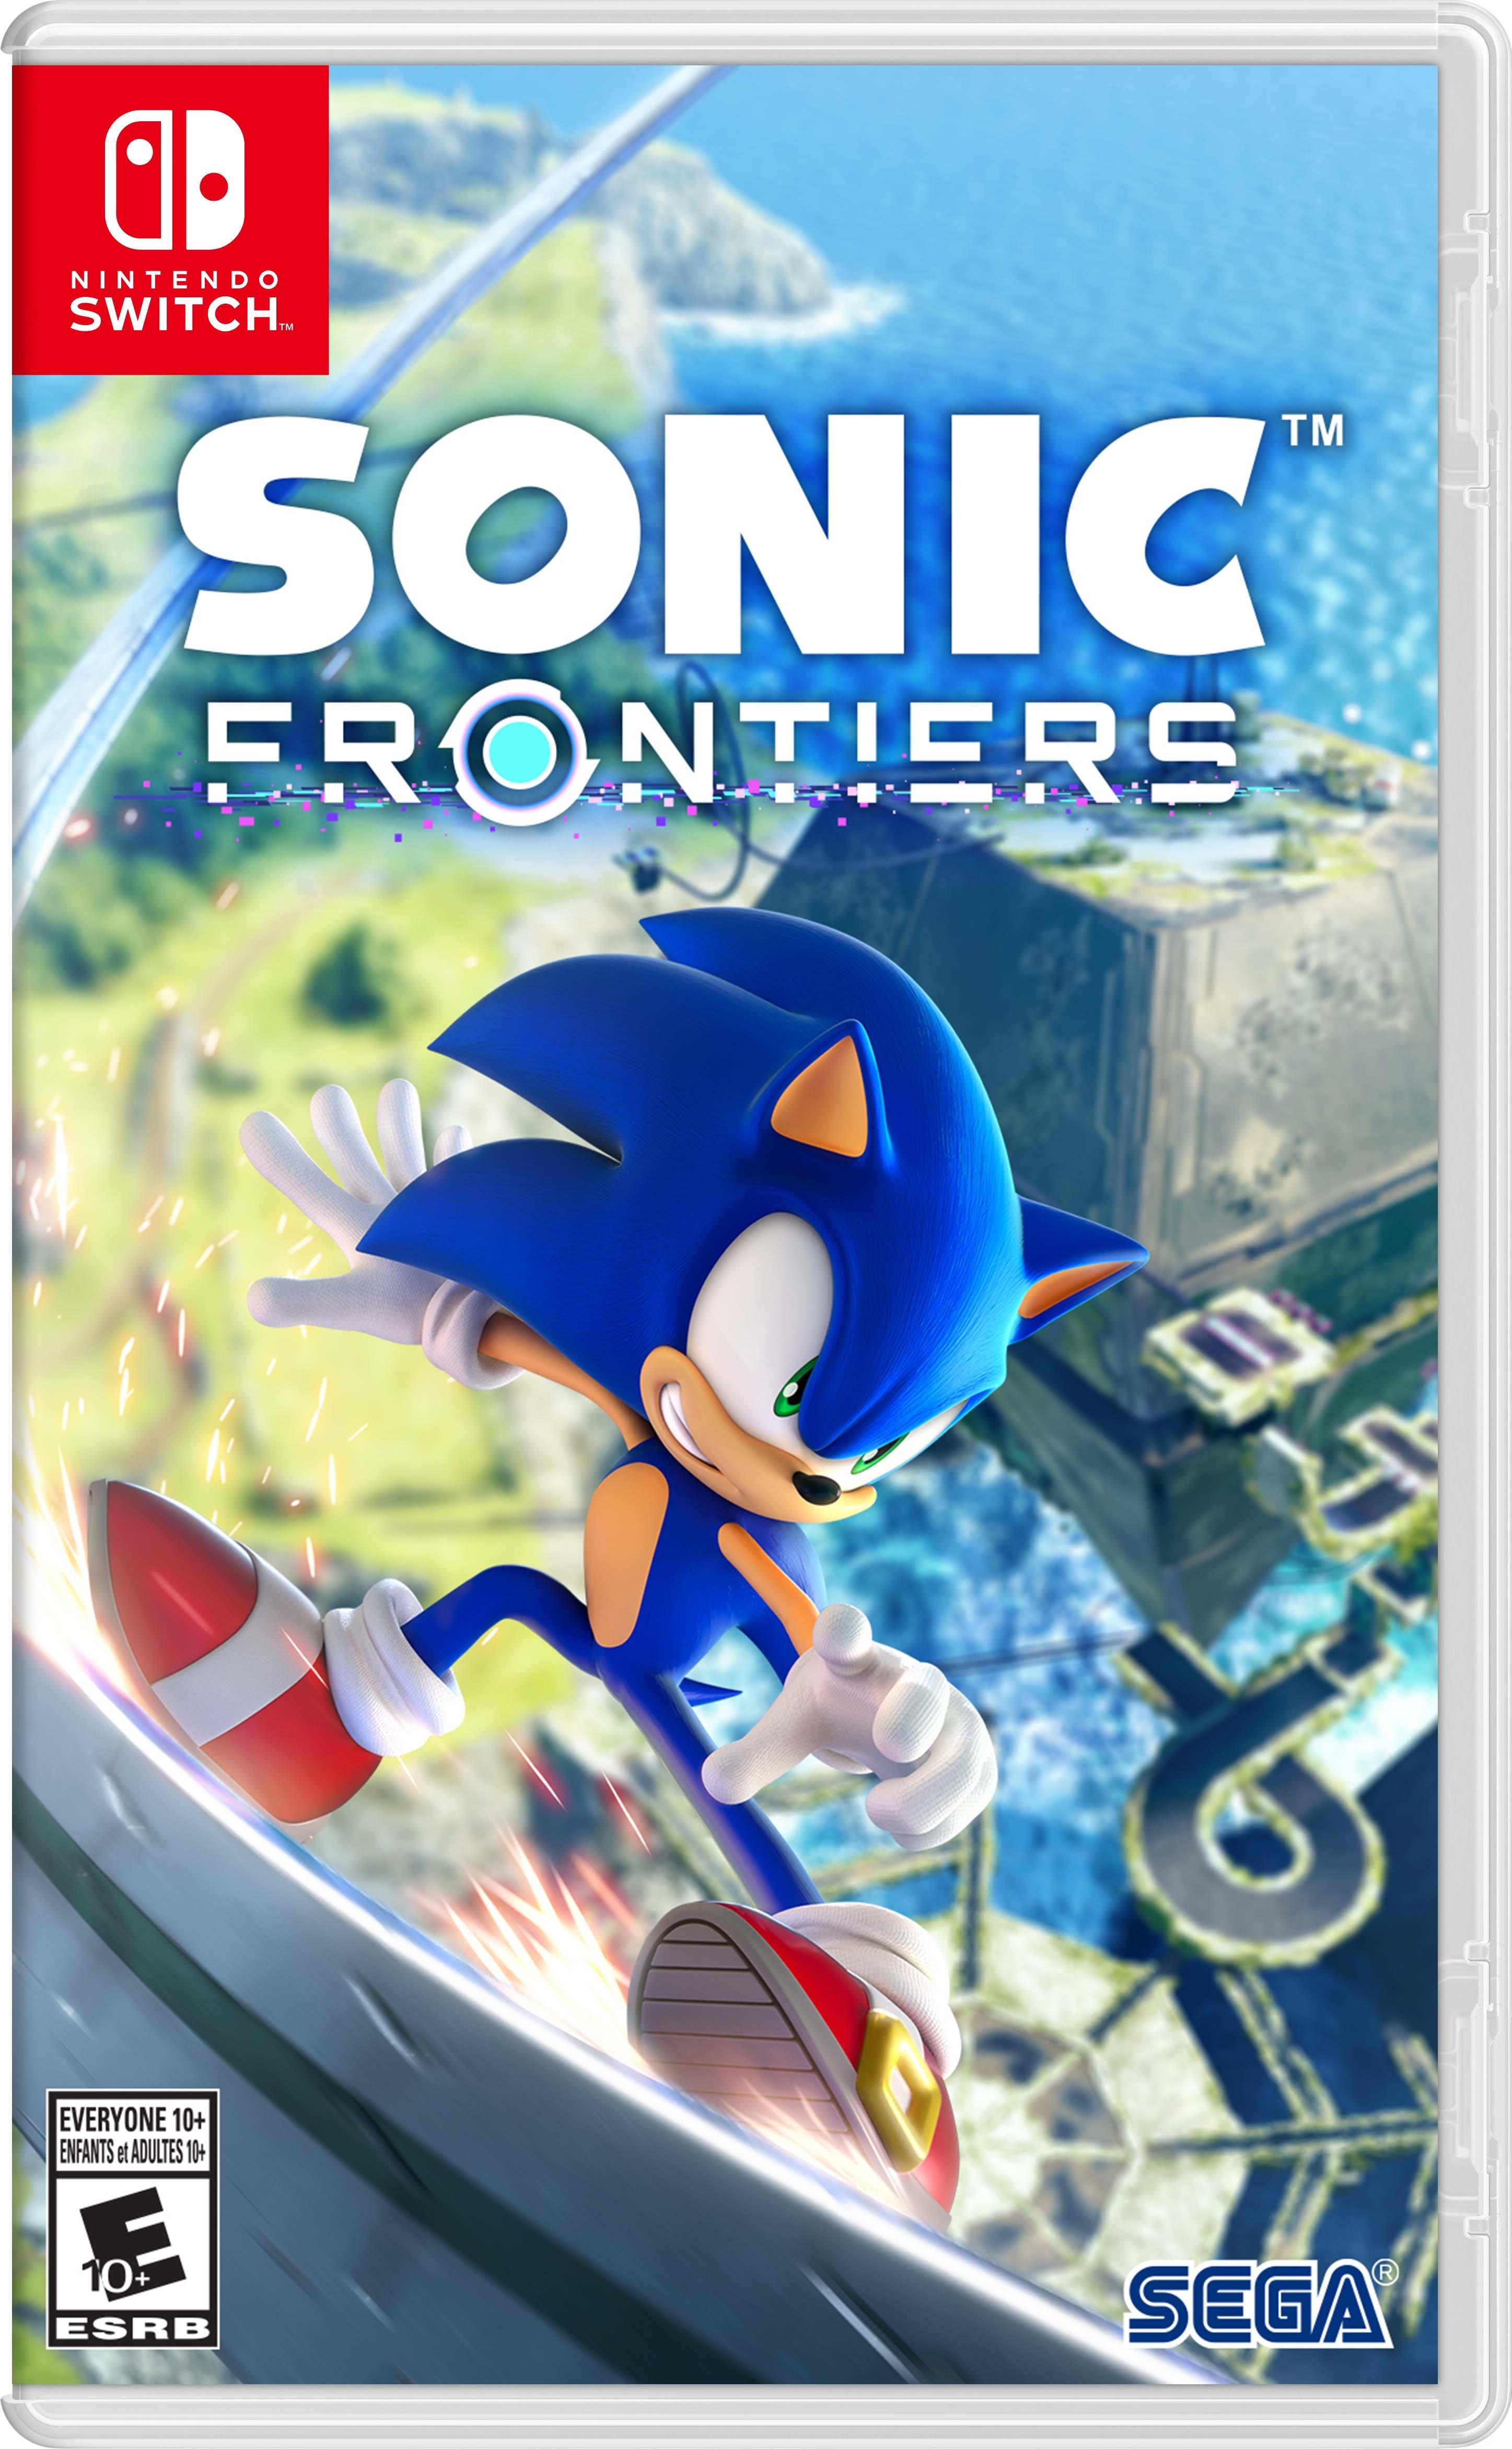 Sonic Frontiers Xbox Series X and Sonic The Hedgehog 2 Movie [Bundle] 